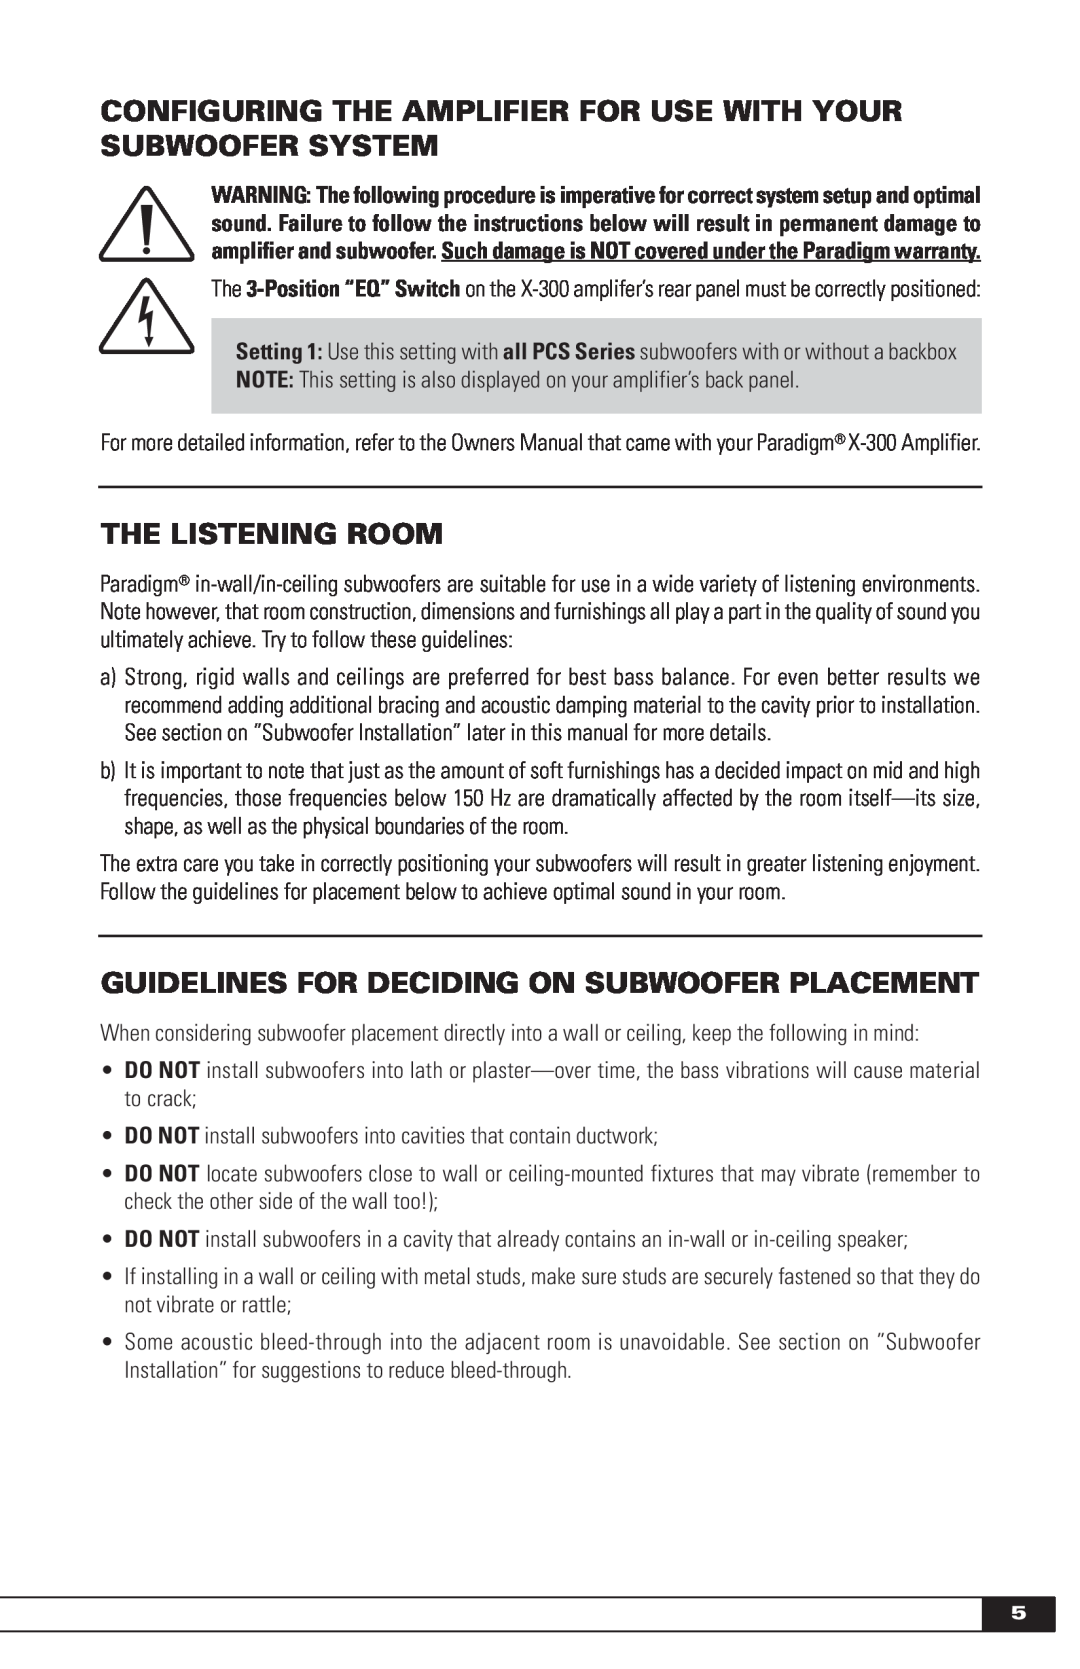 Paradigm Paradigm In-Wall / In-Ceiling Subwoofers The Listening Room, Guidelines For Deciding On Subwoofer Placement 